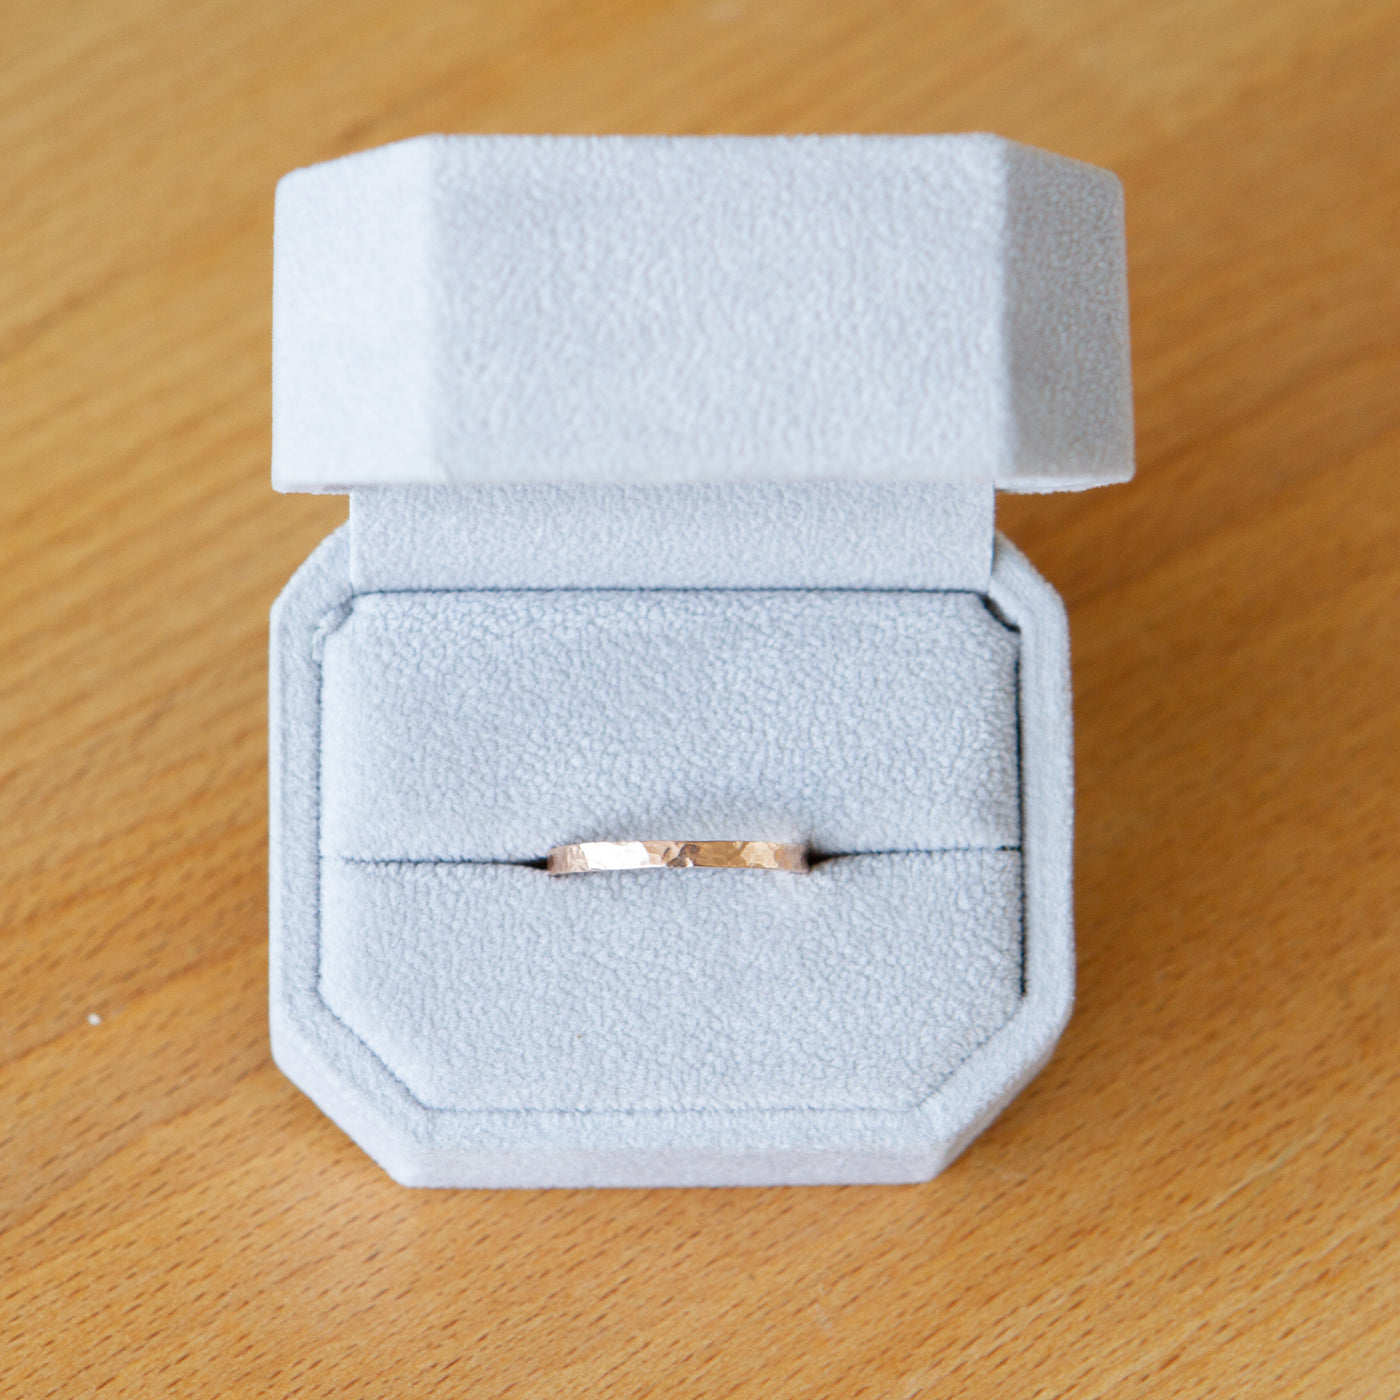 14k rose gold 2mm wide blue ridge hammered band in a gift box by Corey Egan